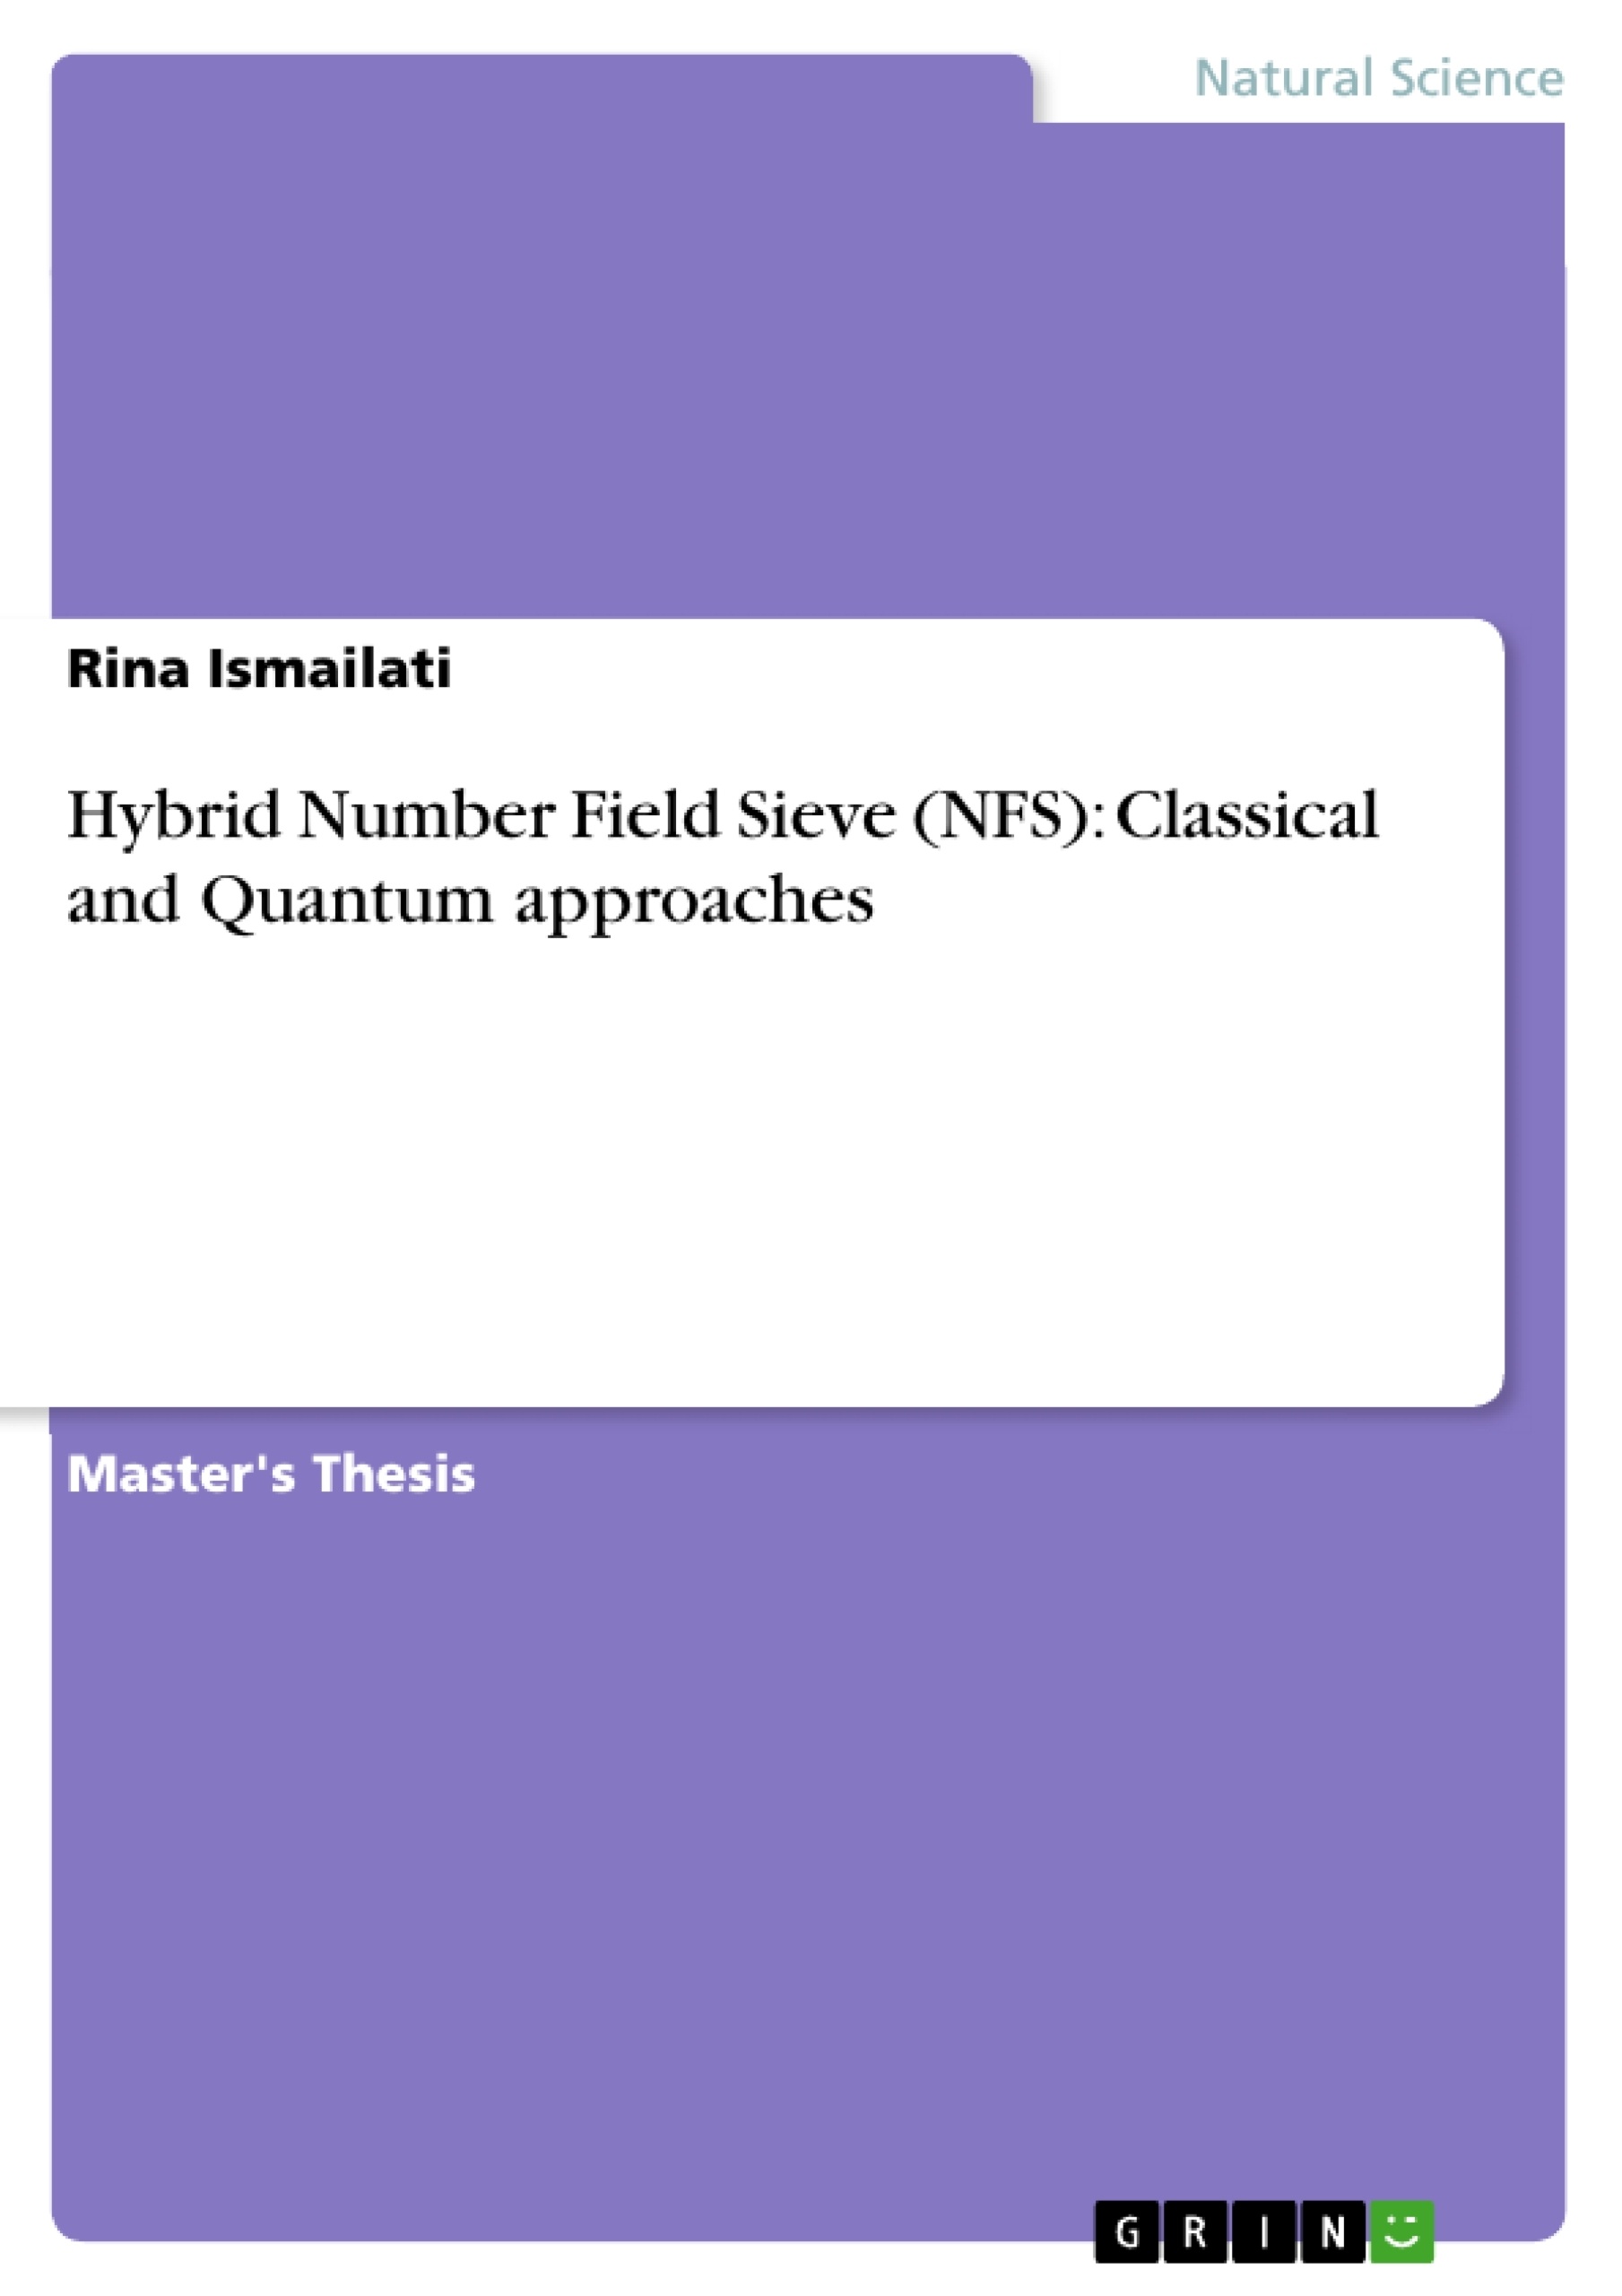 Title: Hybrid Number Field Sieve (NFS): Classical and Quantum approaches